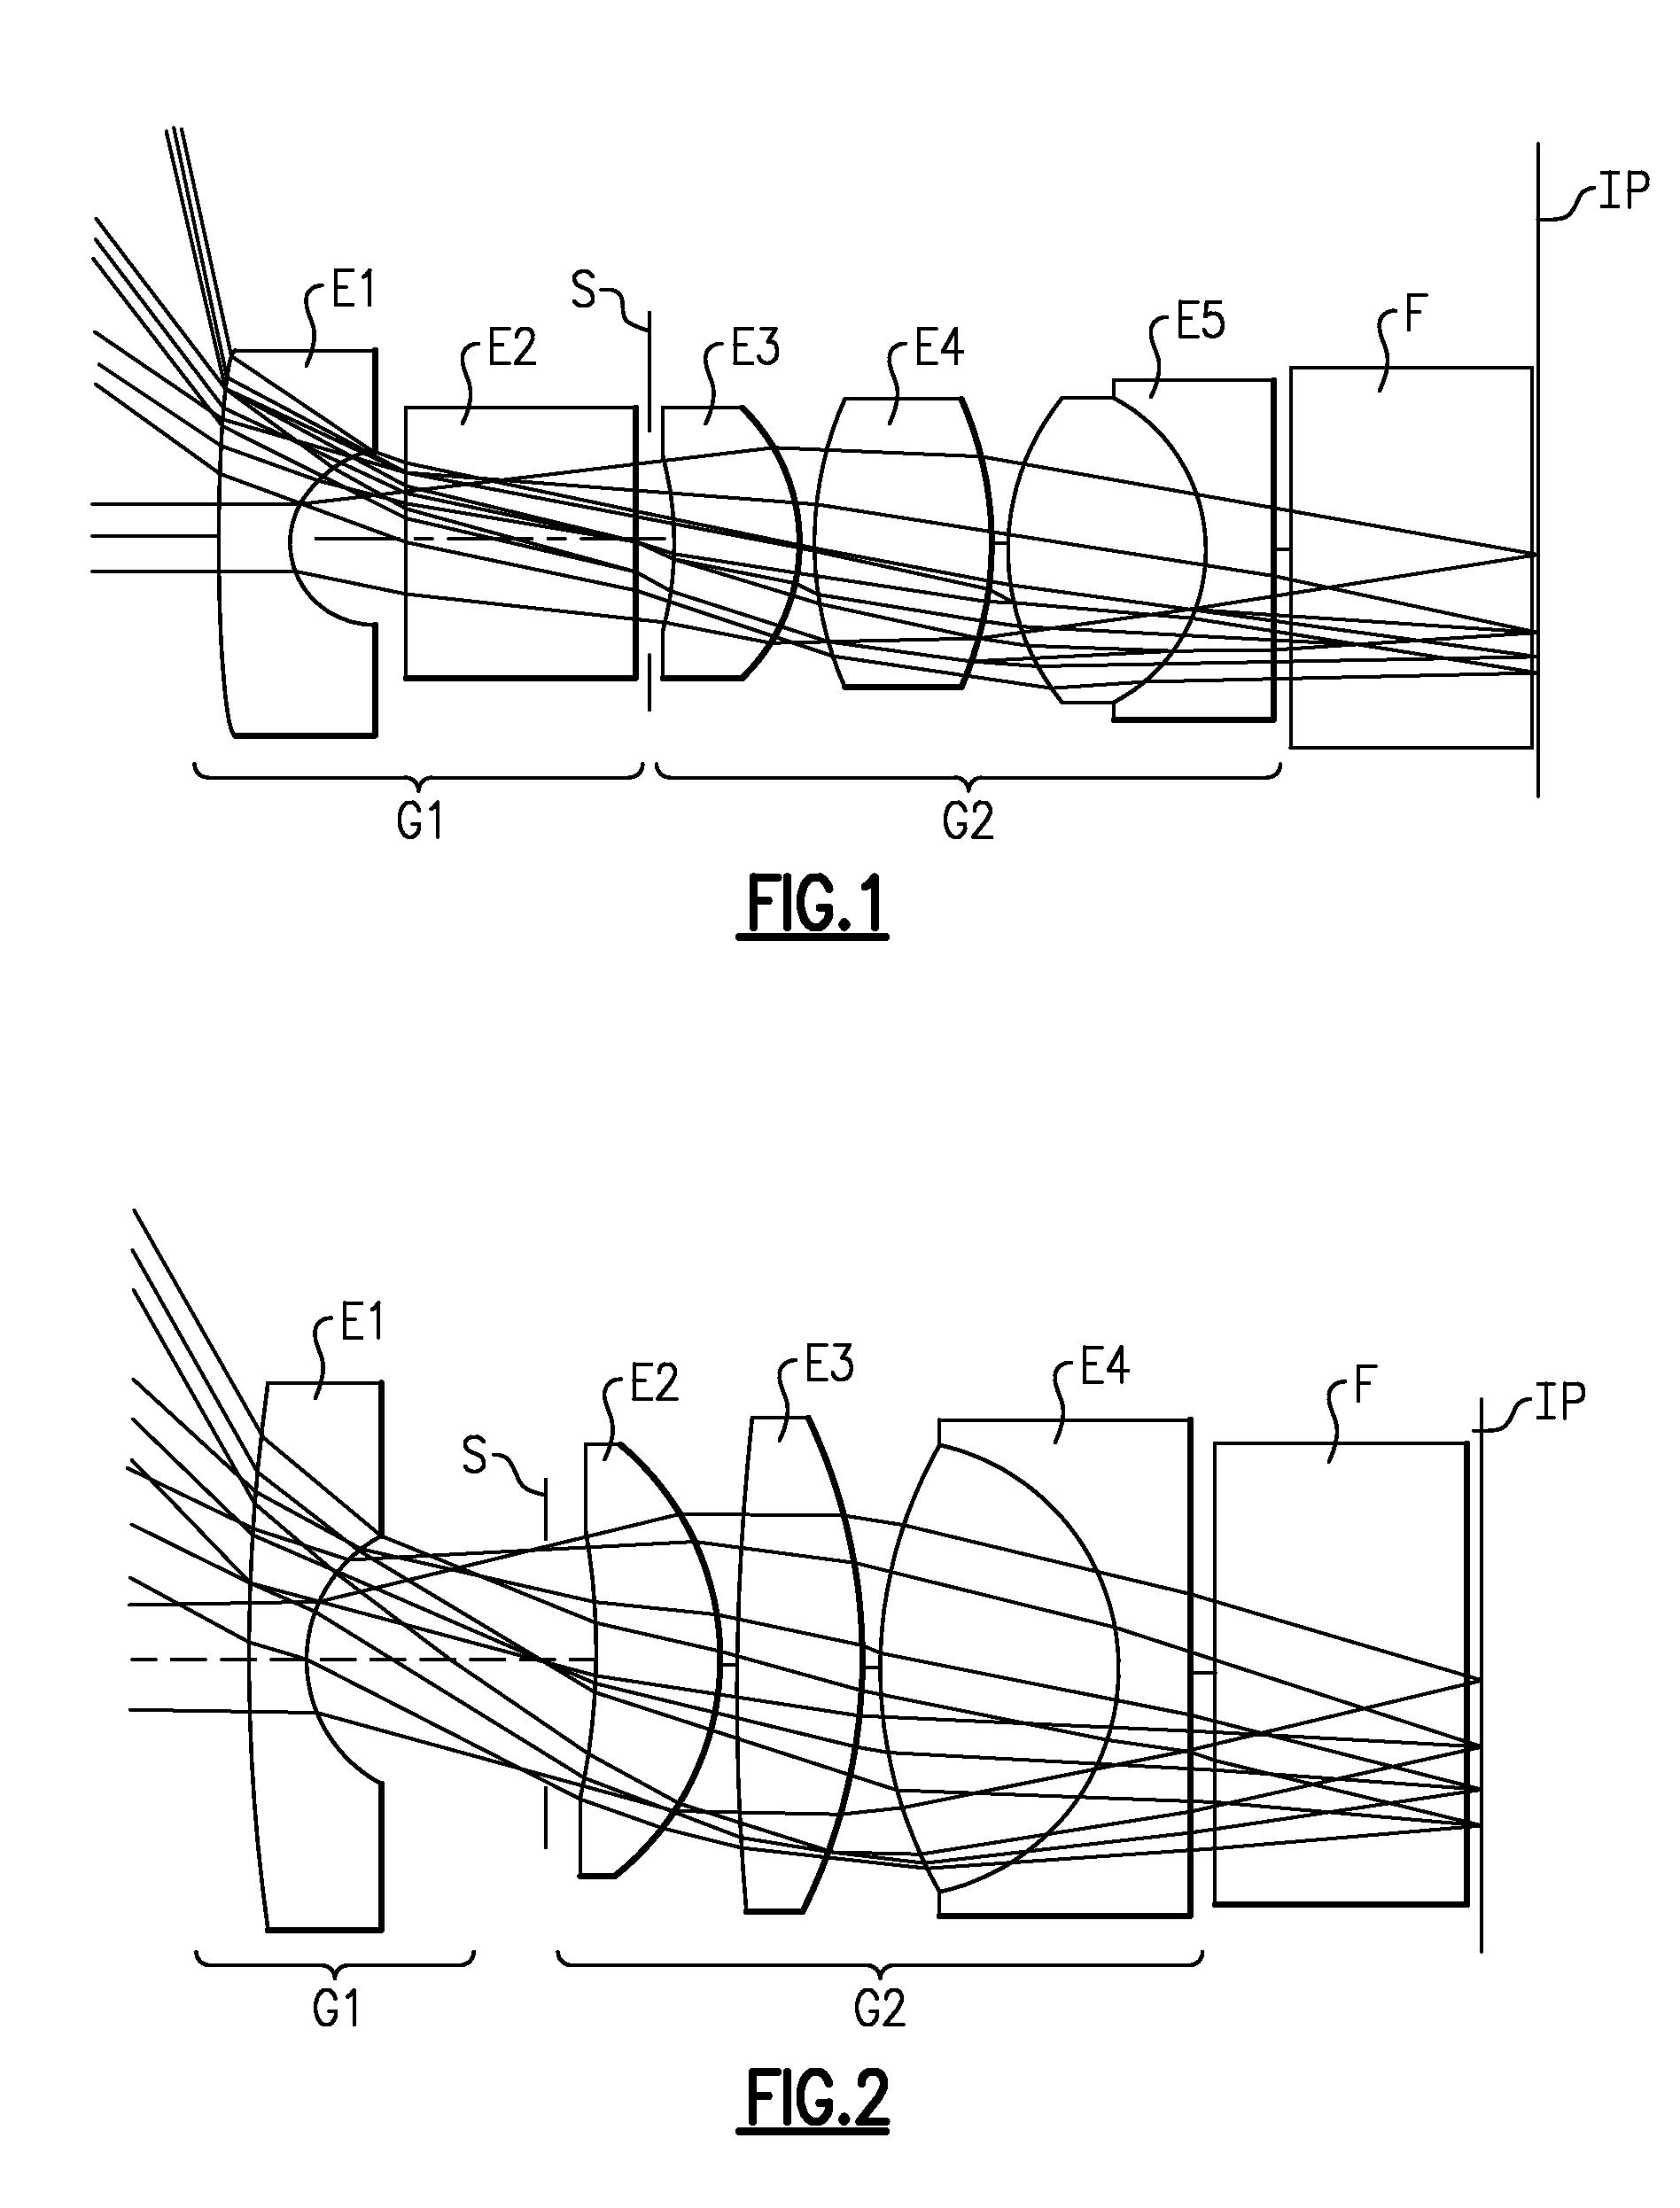 Endoscope objective lens with large entrance pupil diameter and high numerical aperture